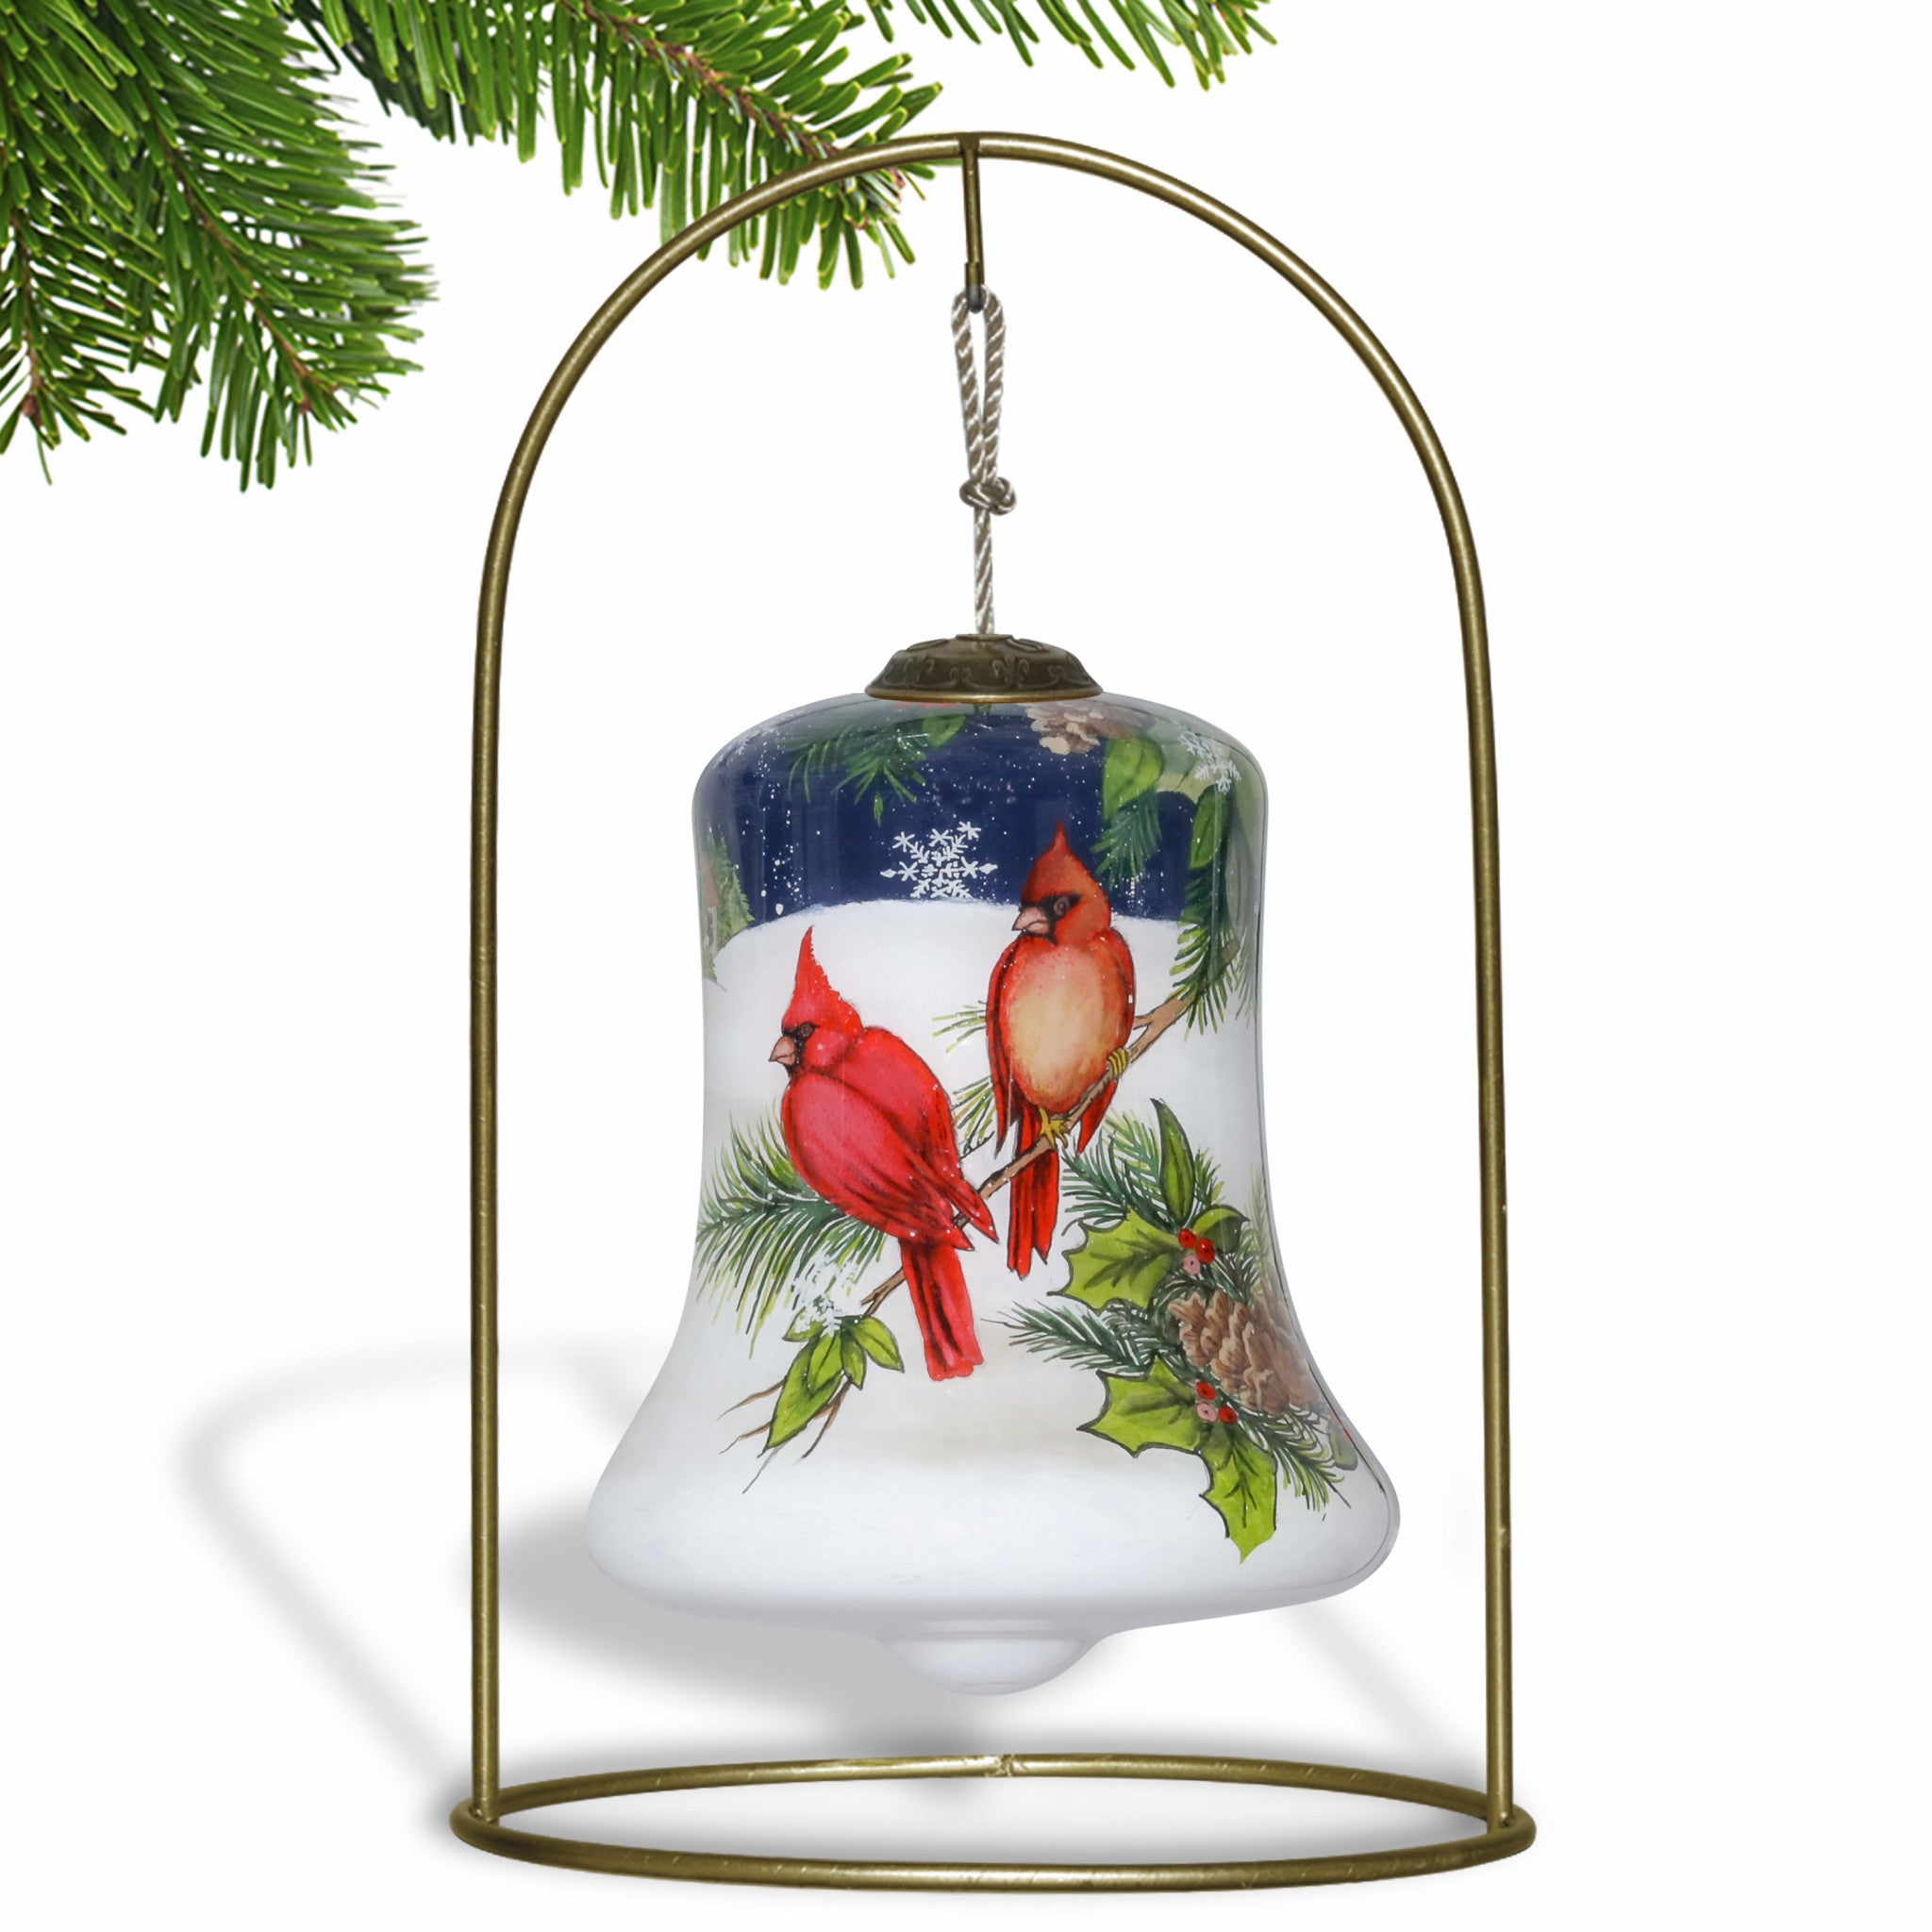 Dual-Cardinals-Hand-Painted-Mouth-Blown-Glass-Ornament-Christmas-Ornaments